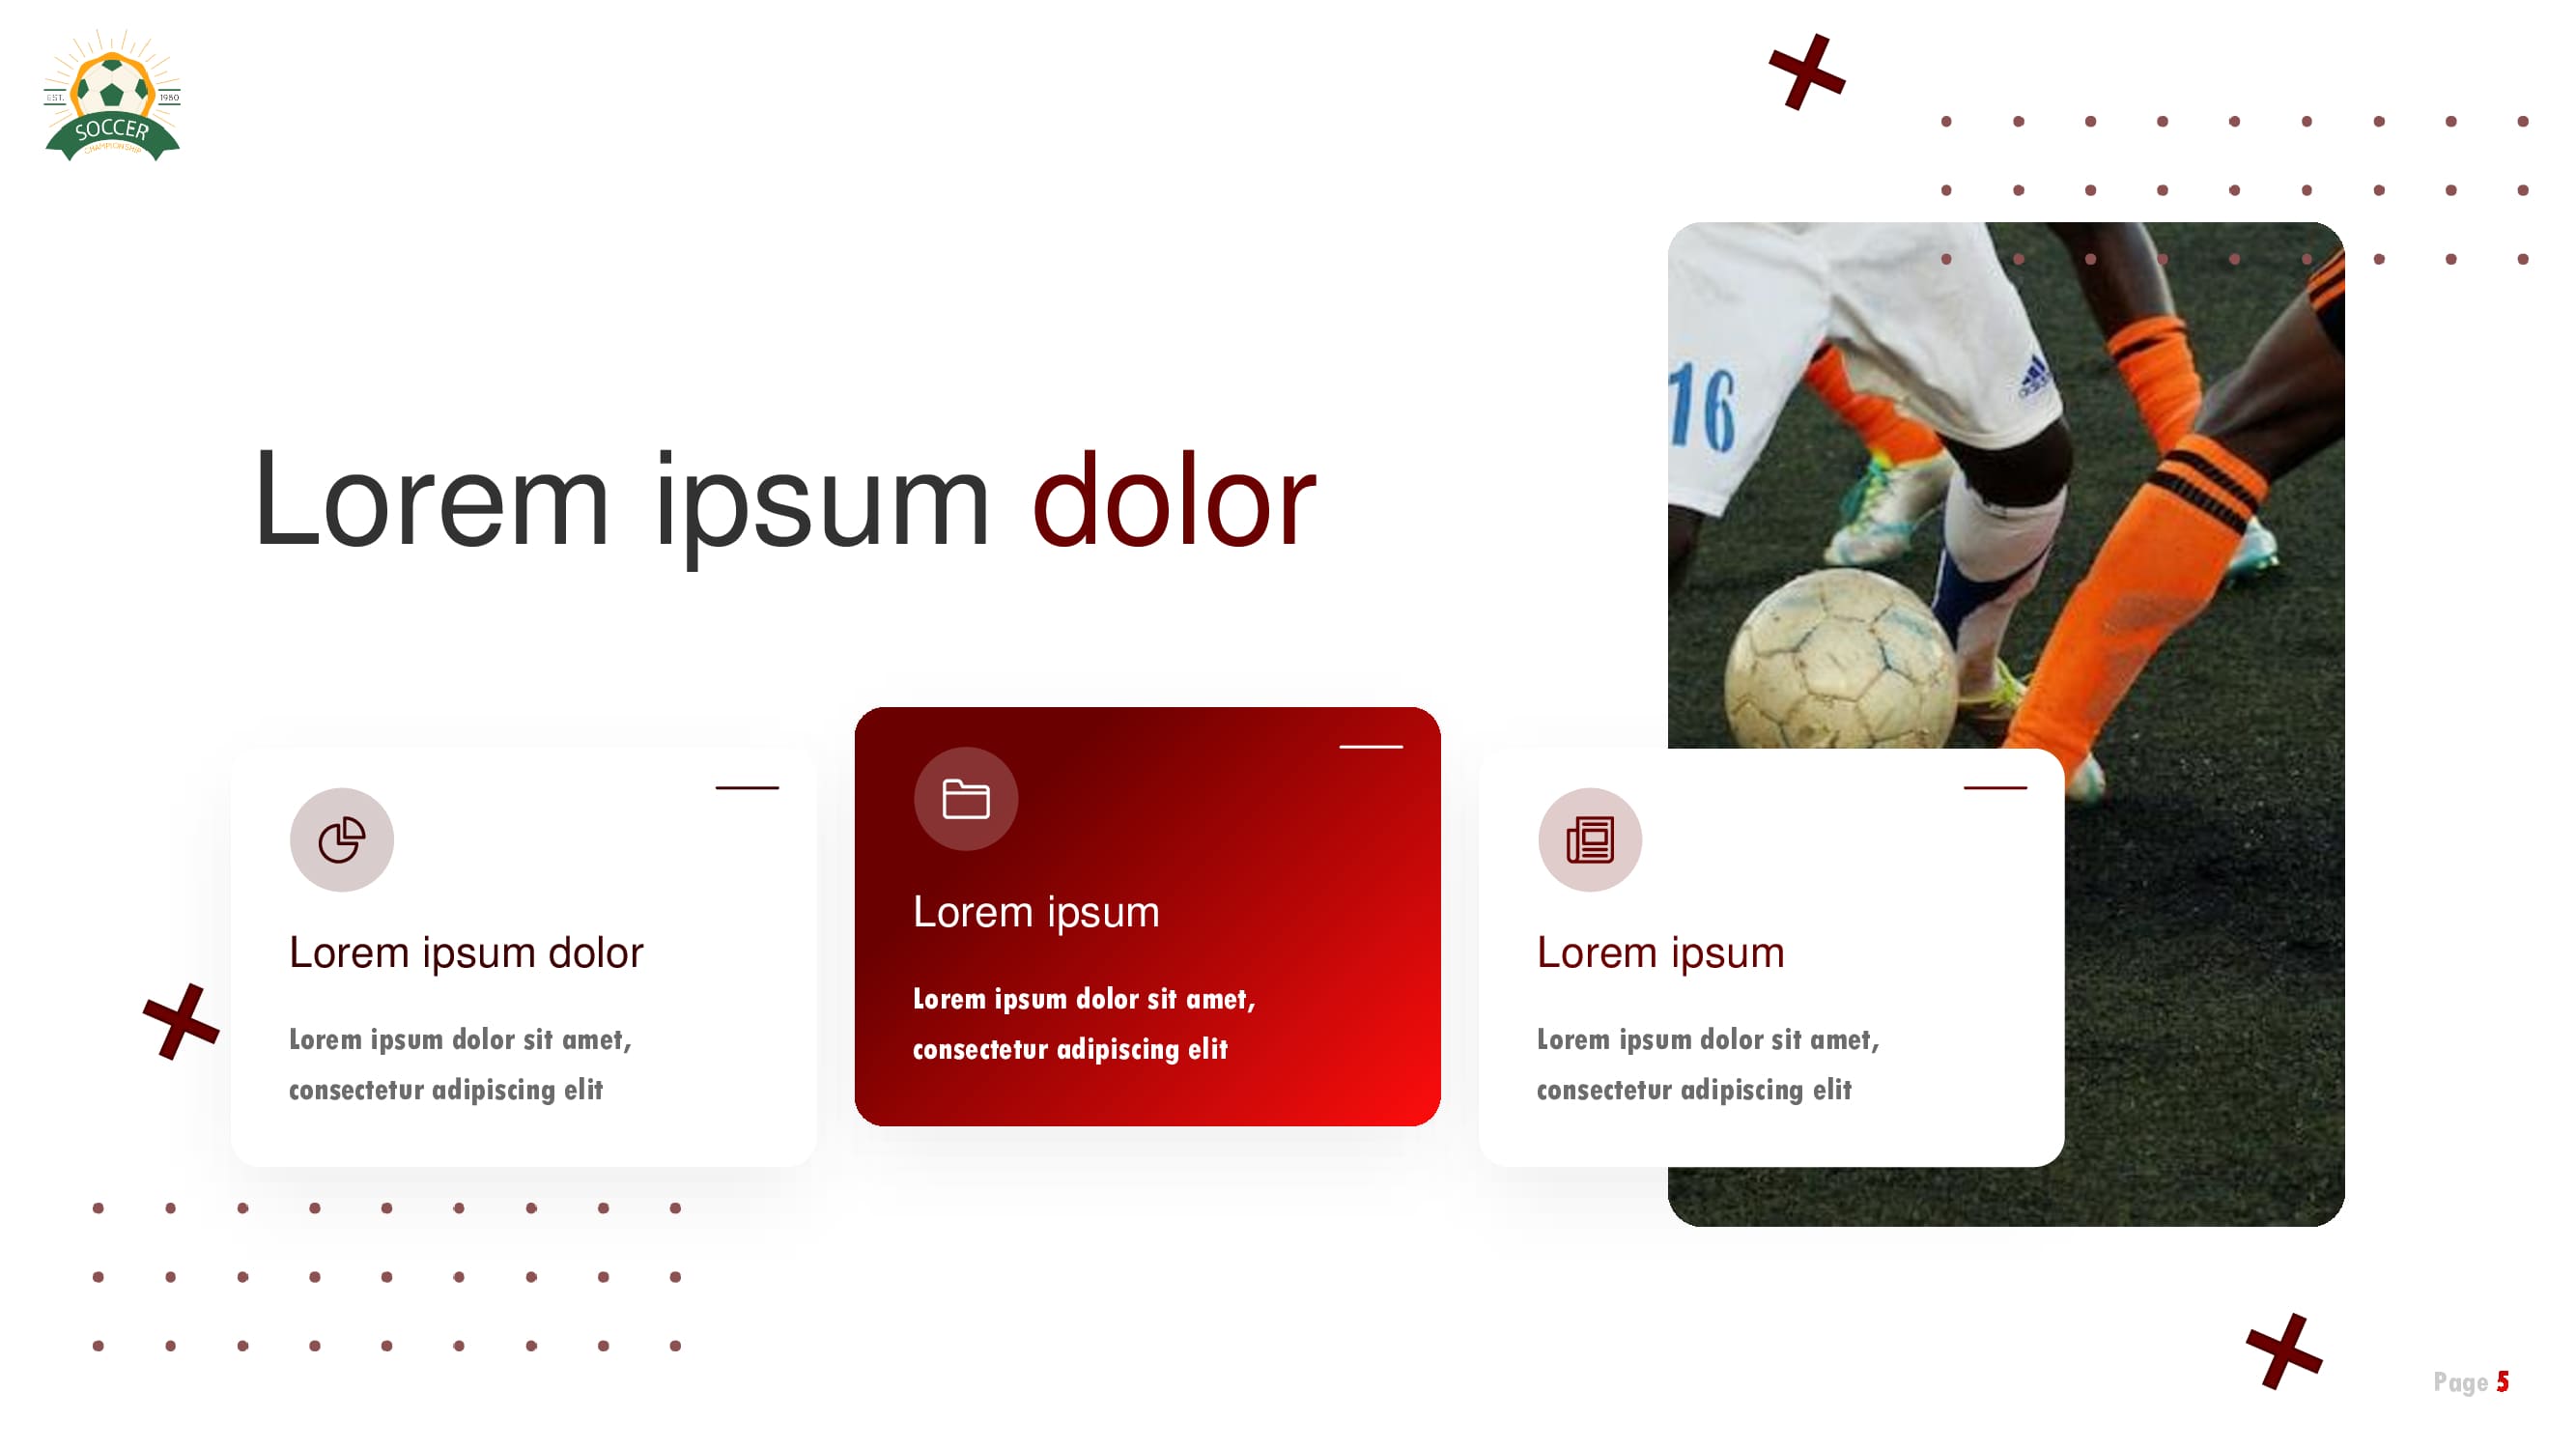 Sport image with 3 white and red items with text and descriptions.